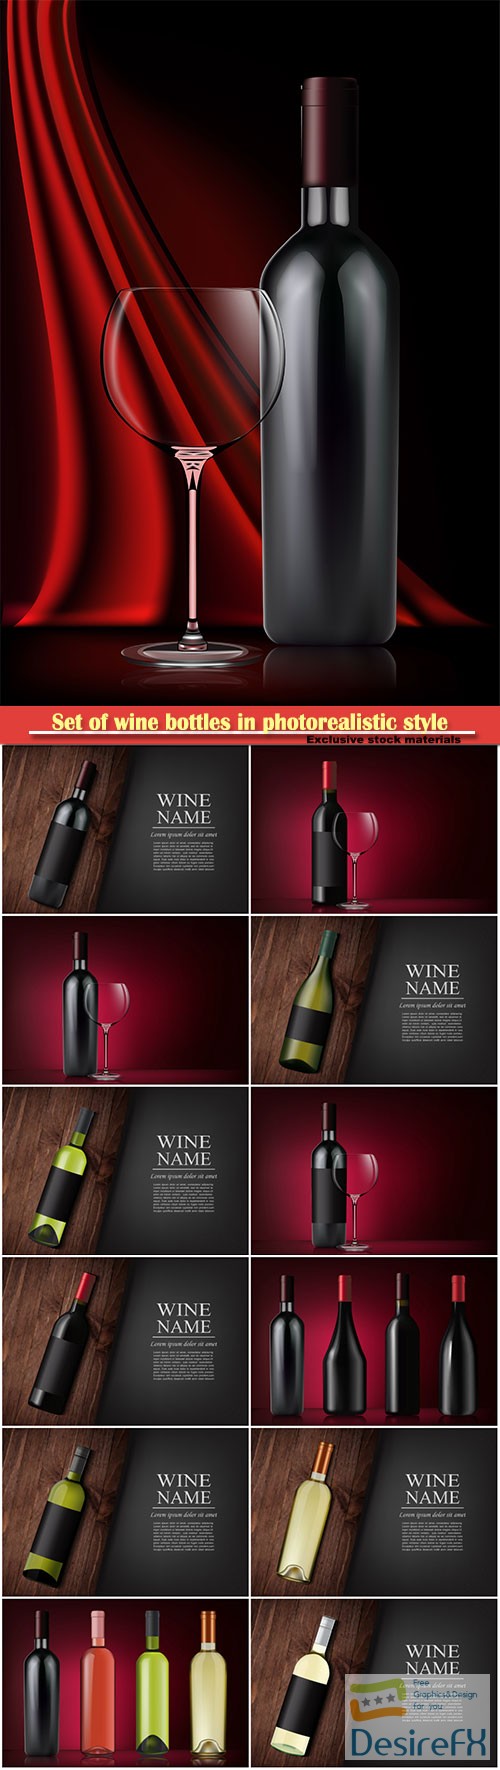 Set of wine bottles in photorealistic style, vector pink, white, red wines